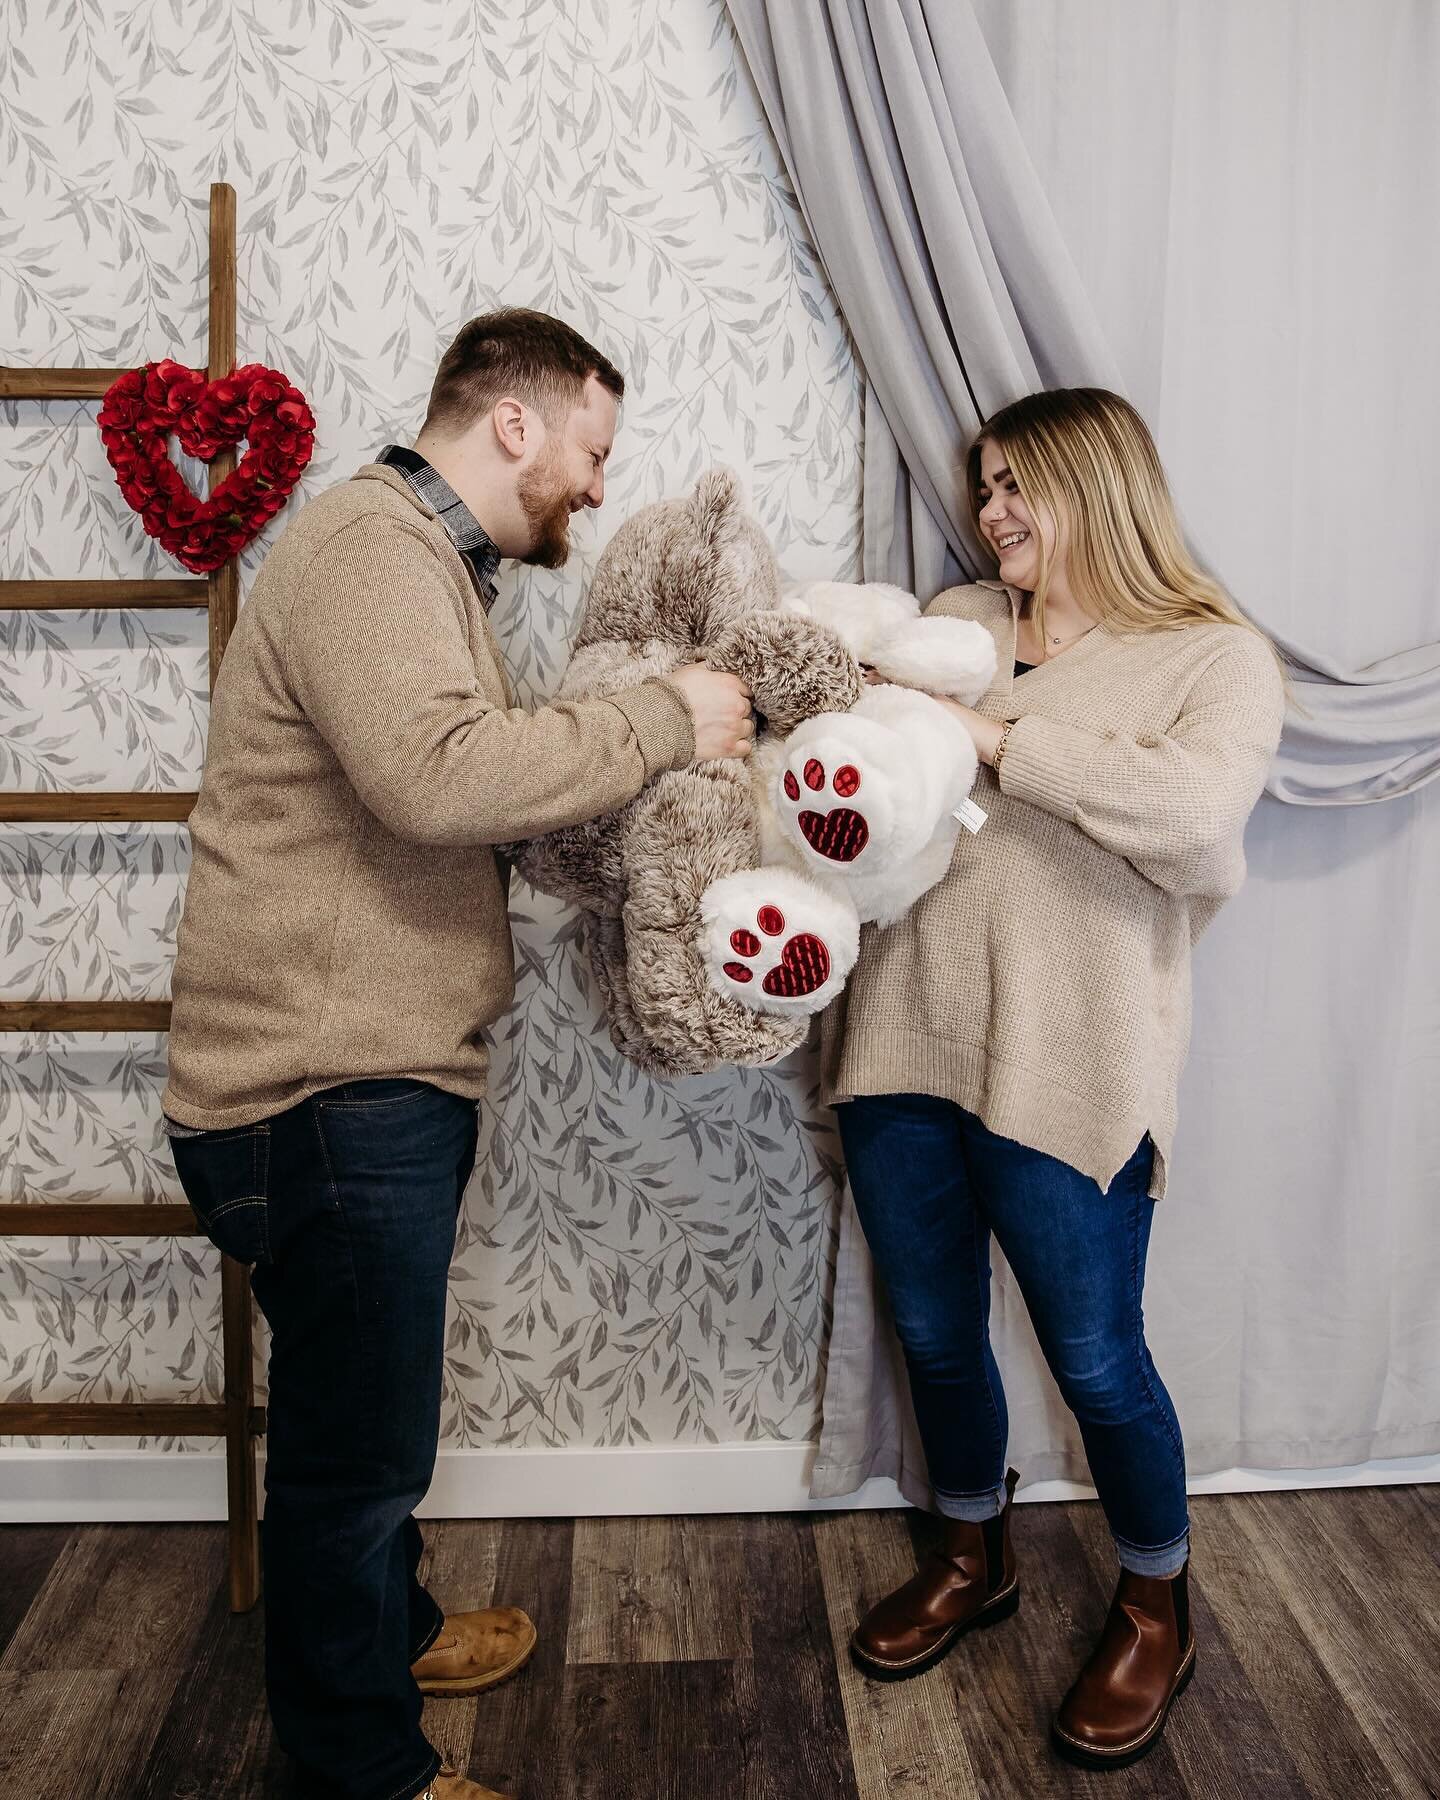 Celebrate L&hearts;️VE with a Valentines Day mini shoot! Grab your friends, family, and lovers to capture the memories shot at the lovely @interiorartistry_x_ed studio Feb. 11th, 2024 ! In Grand Rapids, MI 

Reserve your session here ⬇️

https://www.